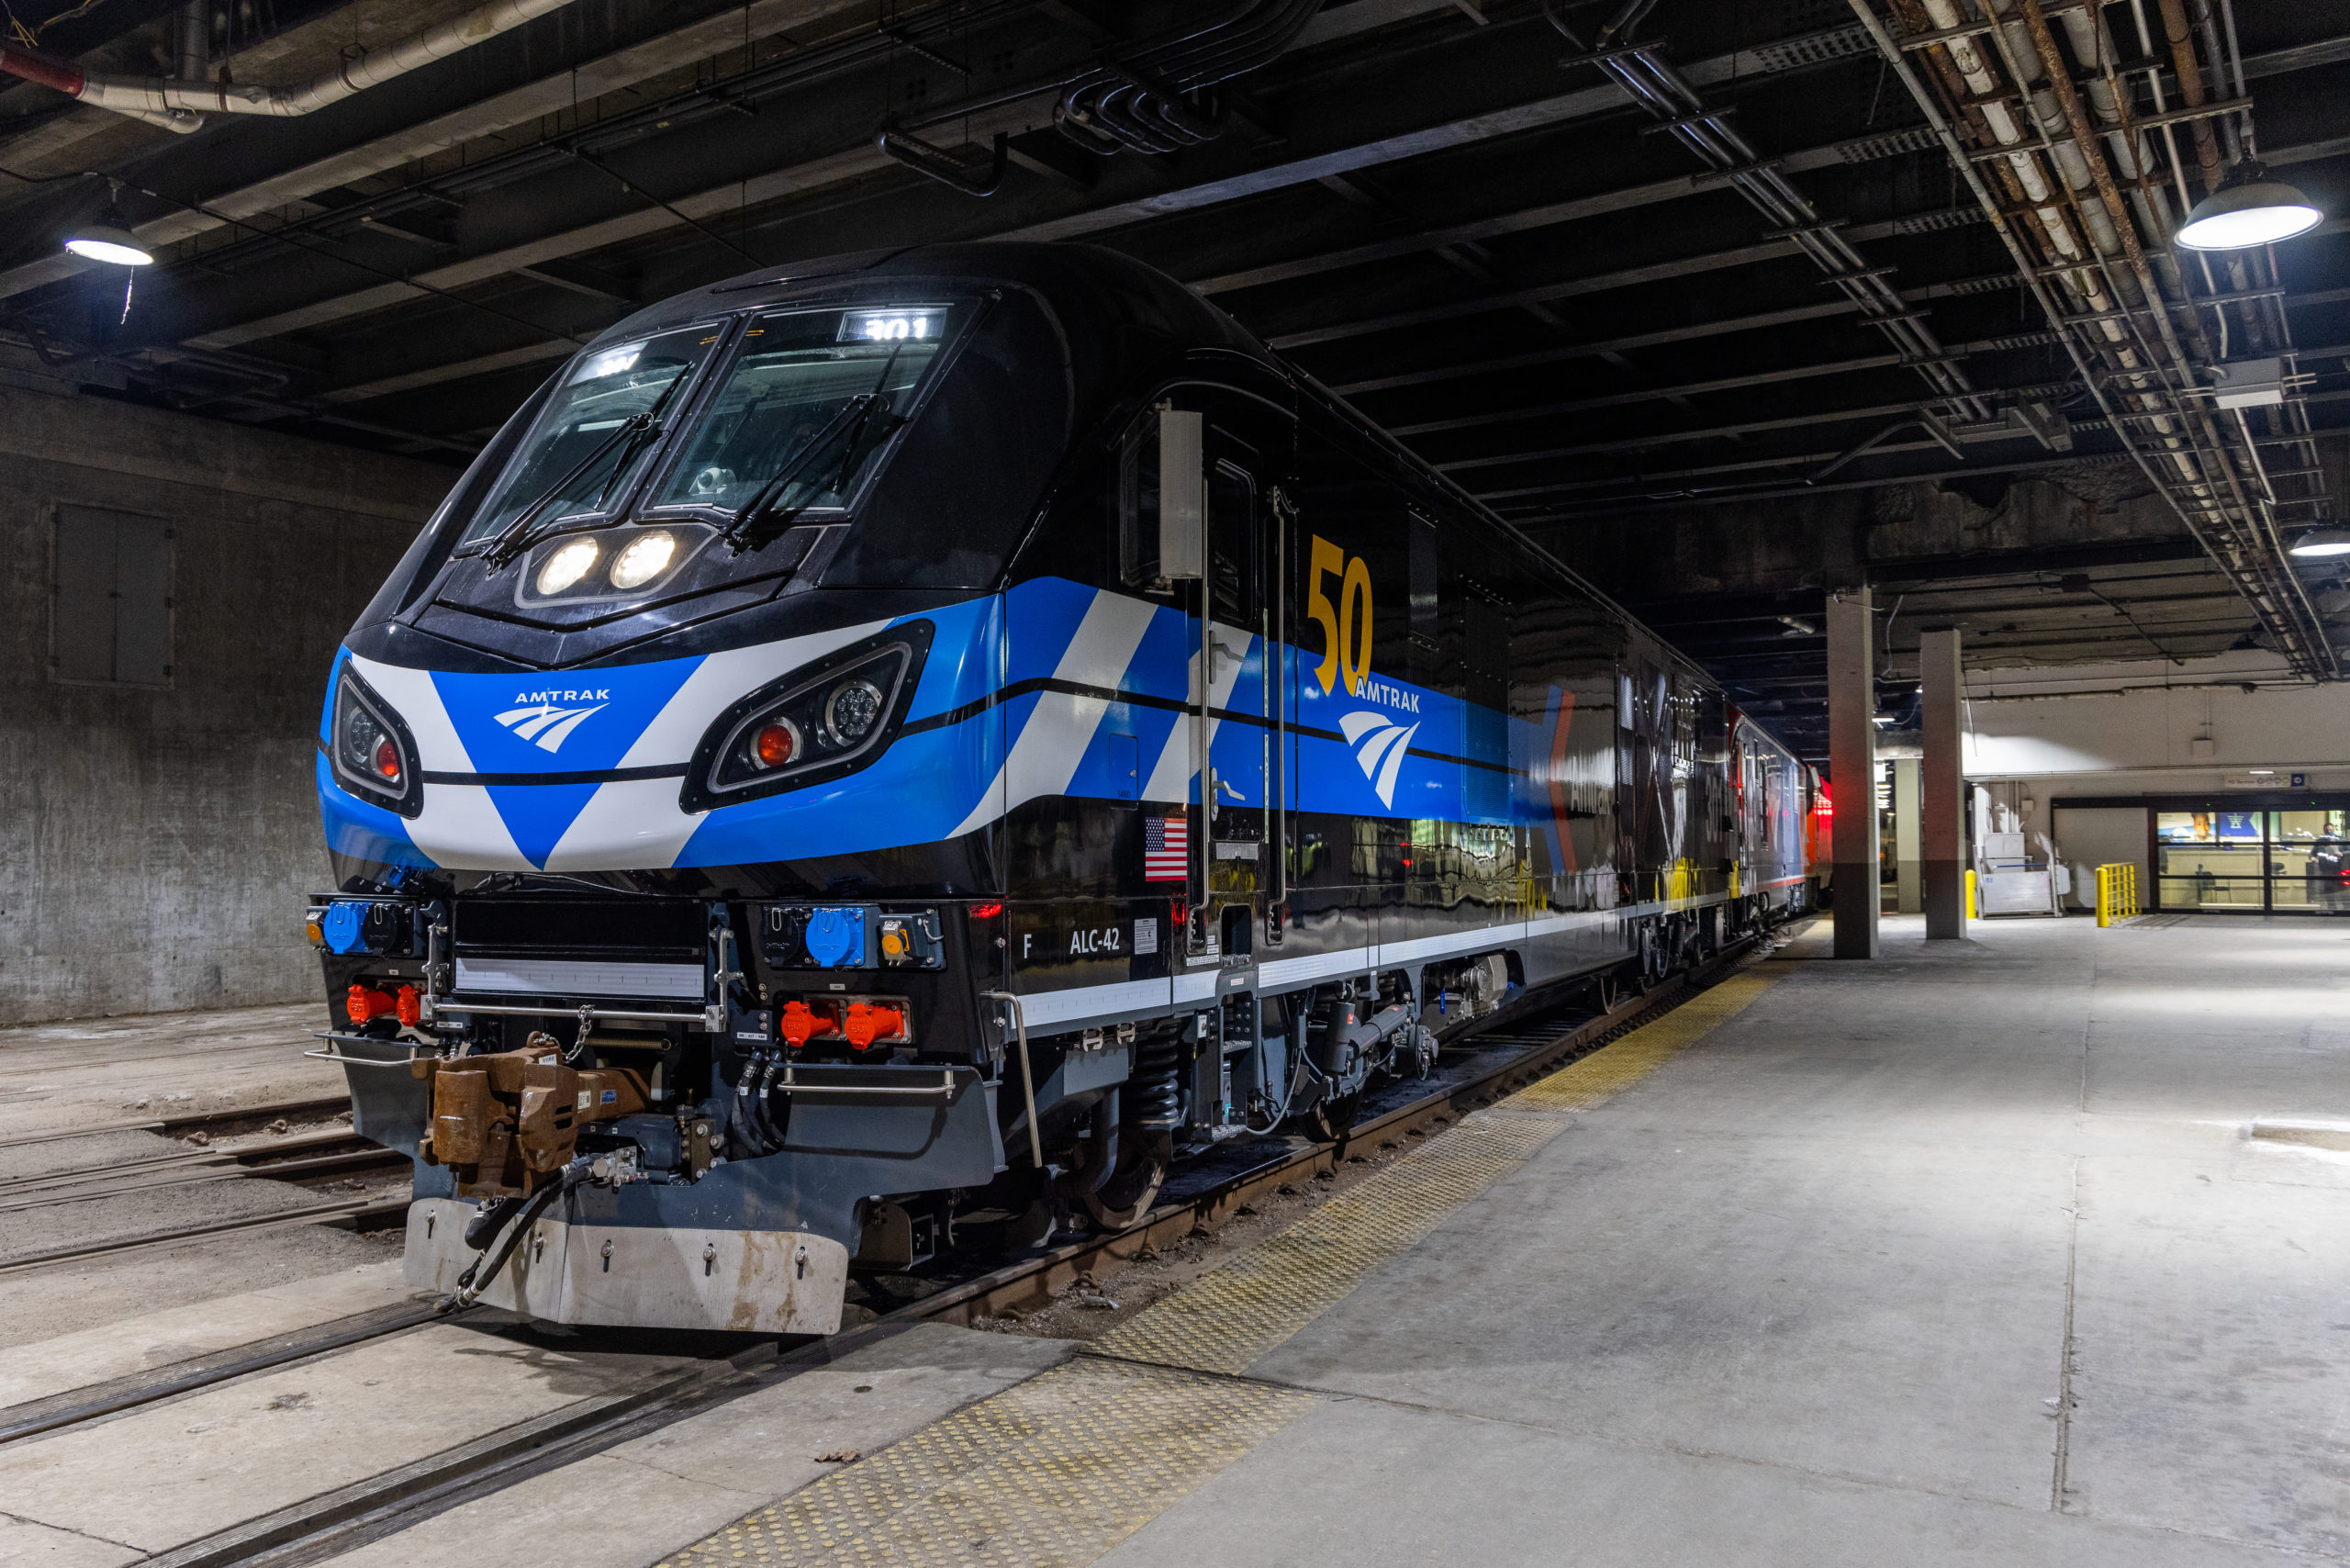 Photo of: Units 301 & 302 preparing to leave Amtrak Chicago Union Station on the "Empire Builder." // Amtrak